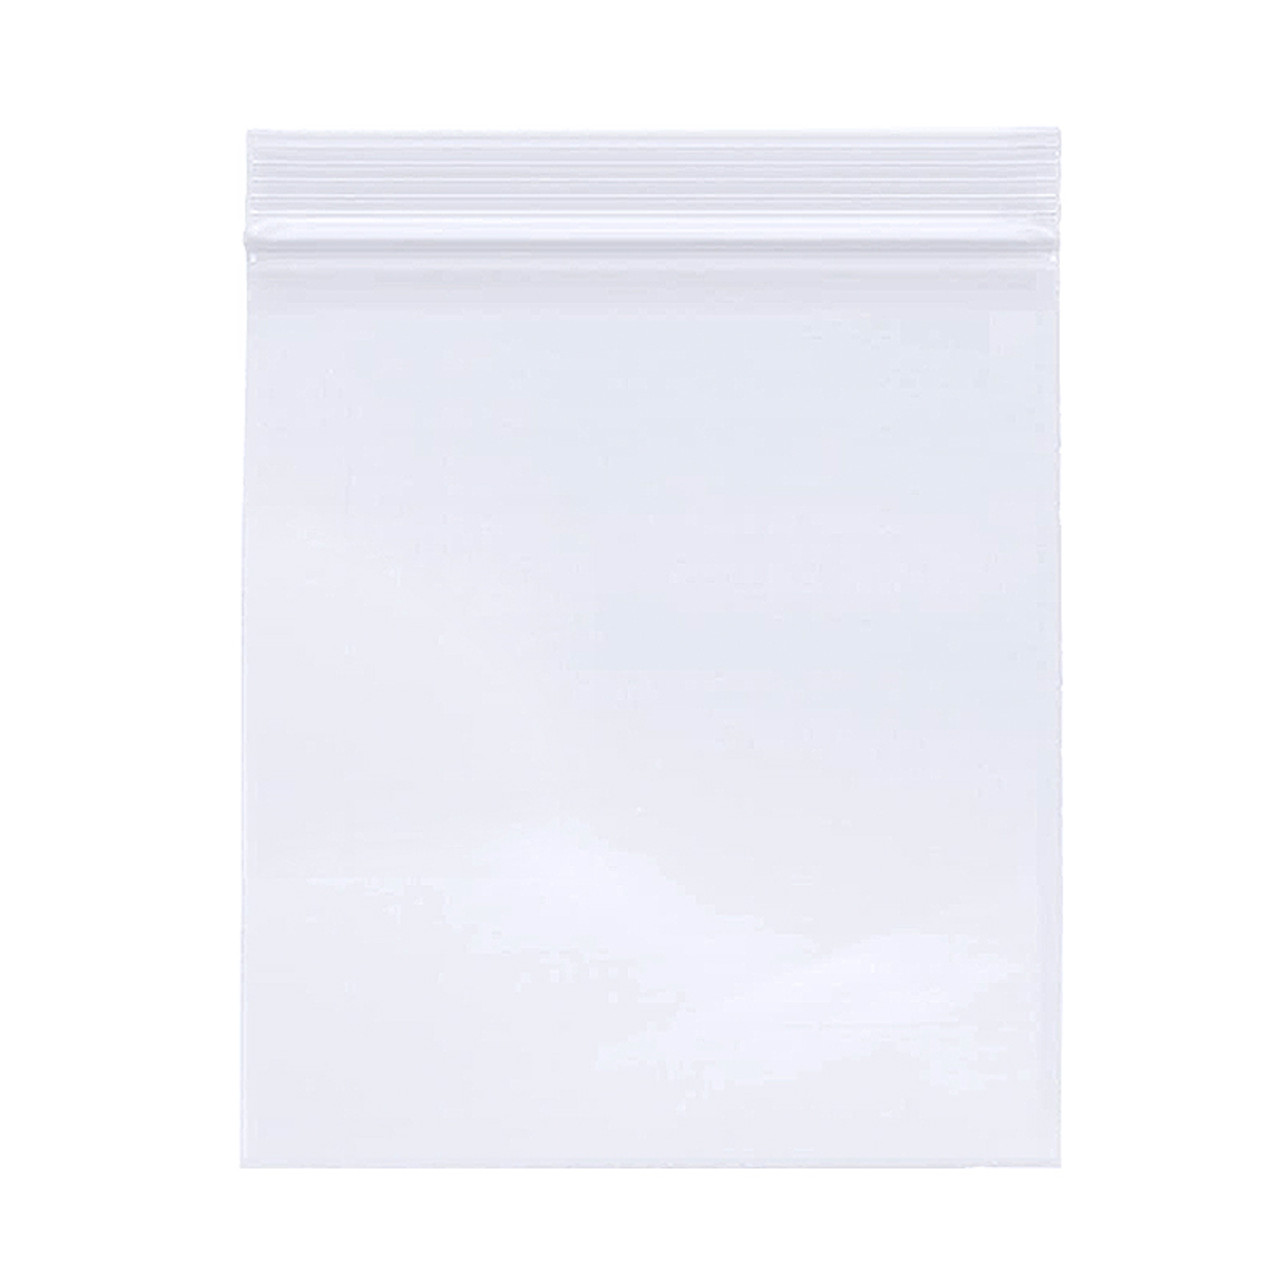 100pcs/lot Clear Thick Heavy-Duty Zip Lock Ziplock Storage Bag Package  Plastic Small Reclosable Poly Bags Thick 4.8MIL 0.12mm - Price history &  Review | AliExpress Seller - Cowslip Storage Bag Store |